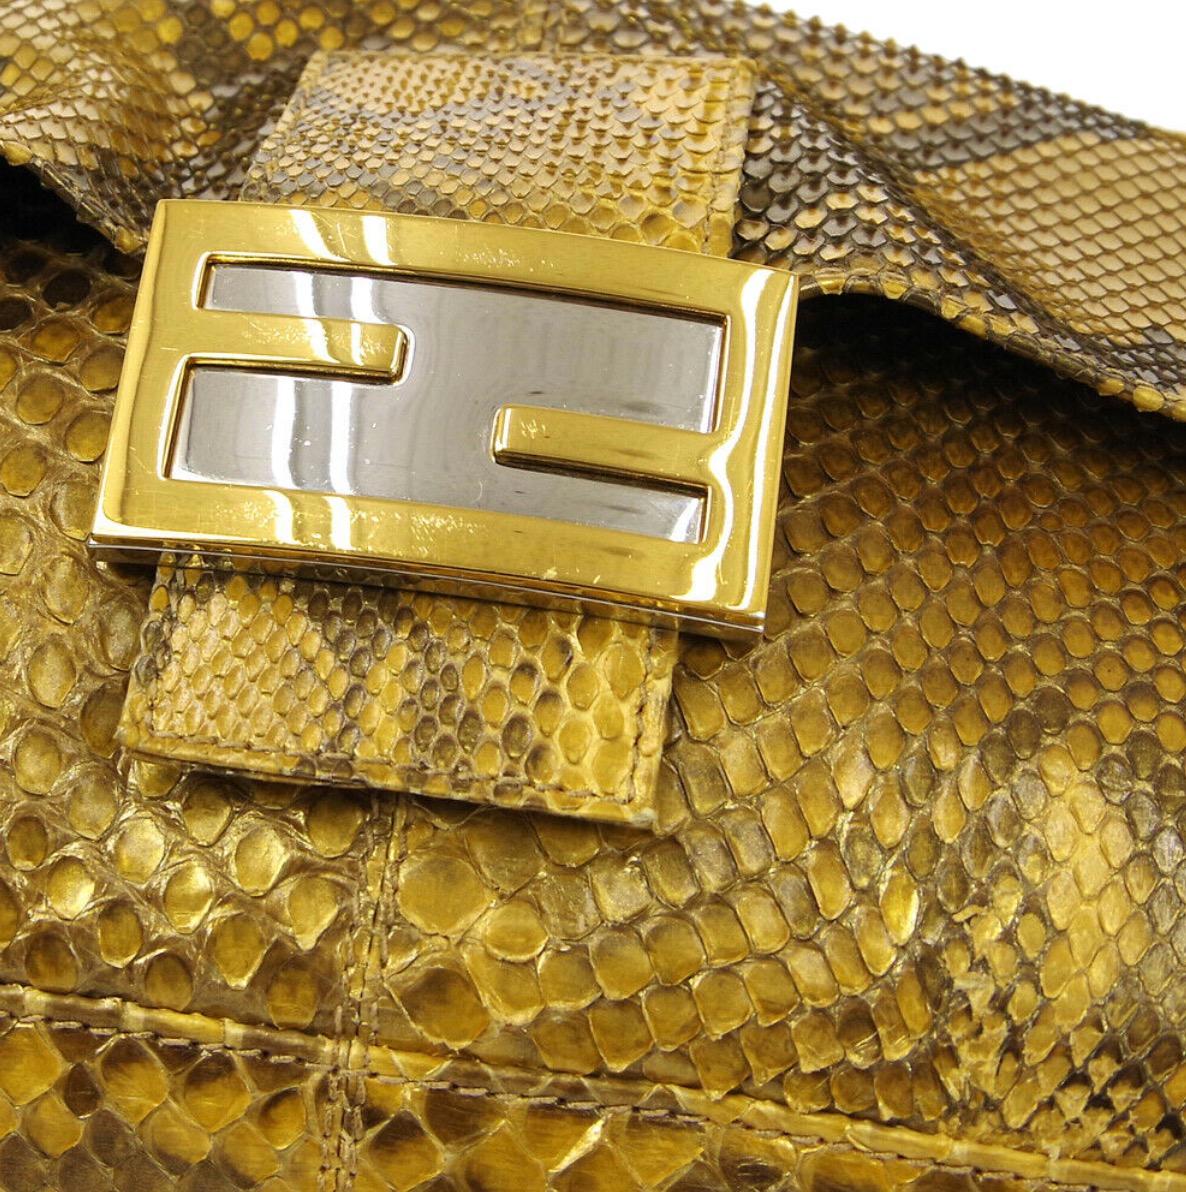 
Snakeskin
Gold tone hardware
Leather lining
Made in Italy
Adjustable handle strap drop 5-9.75